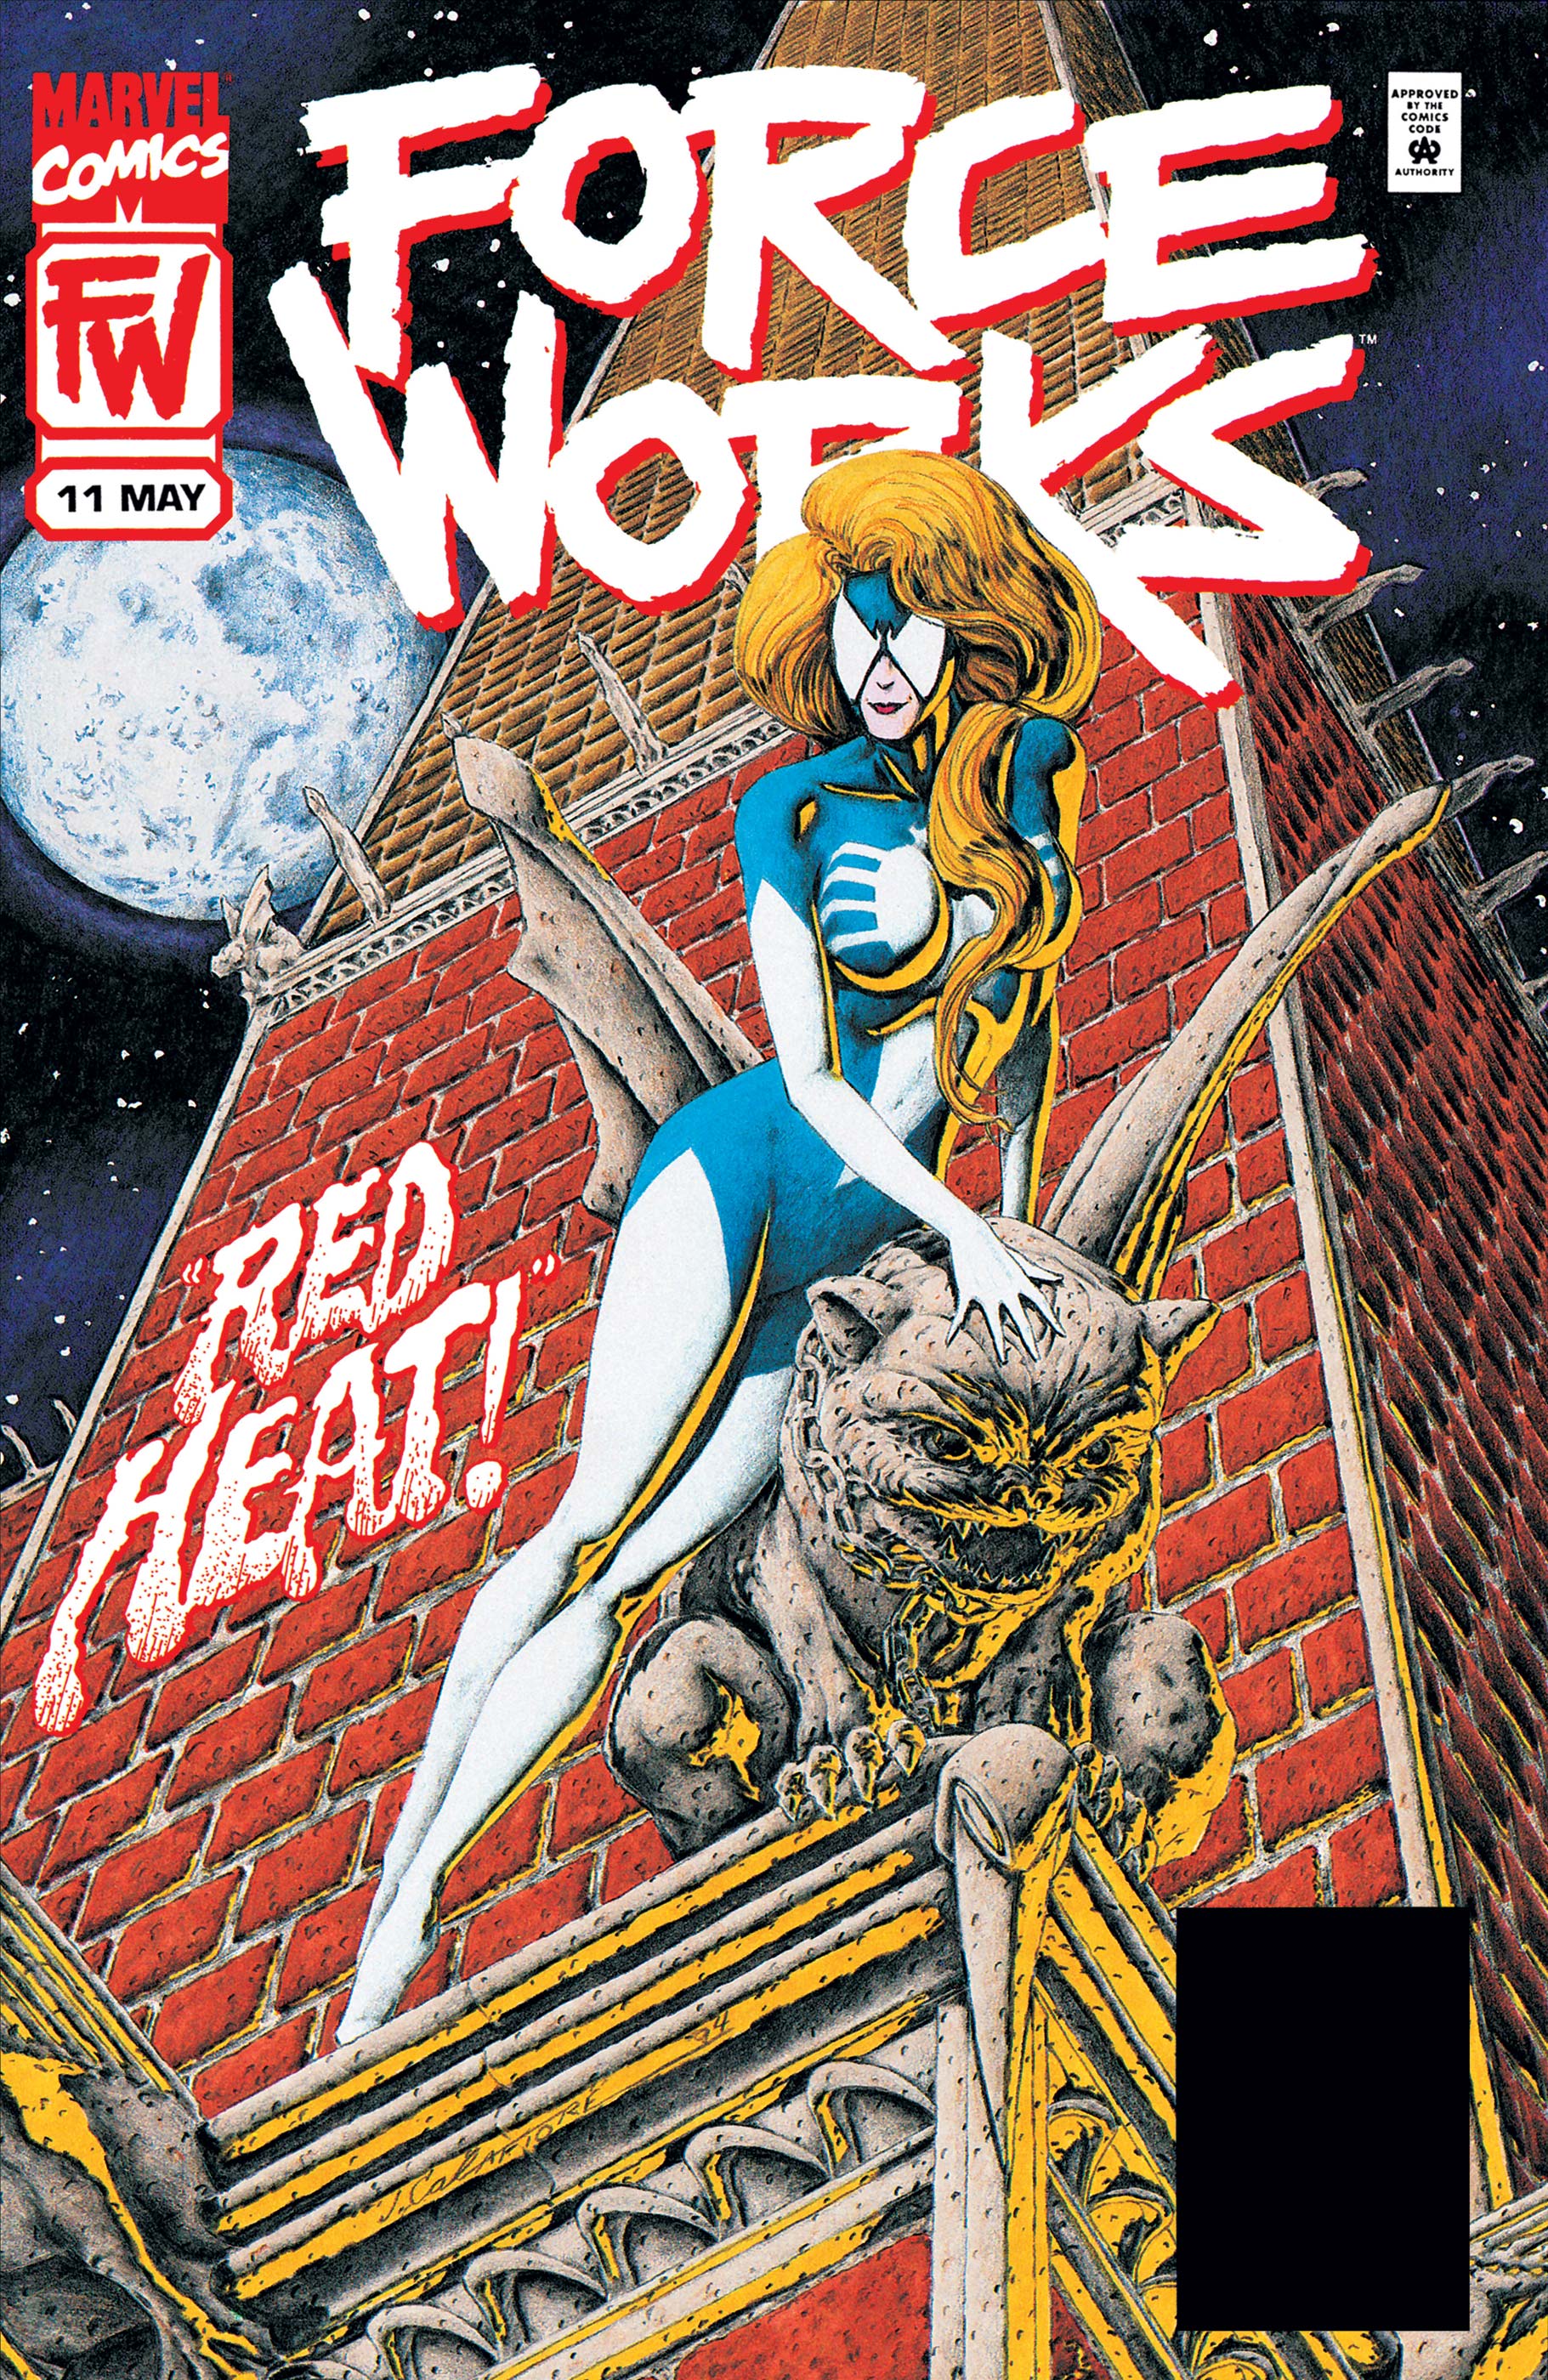 Force Works (1994) #11